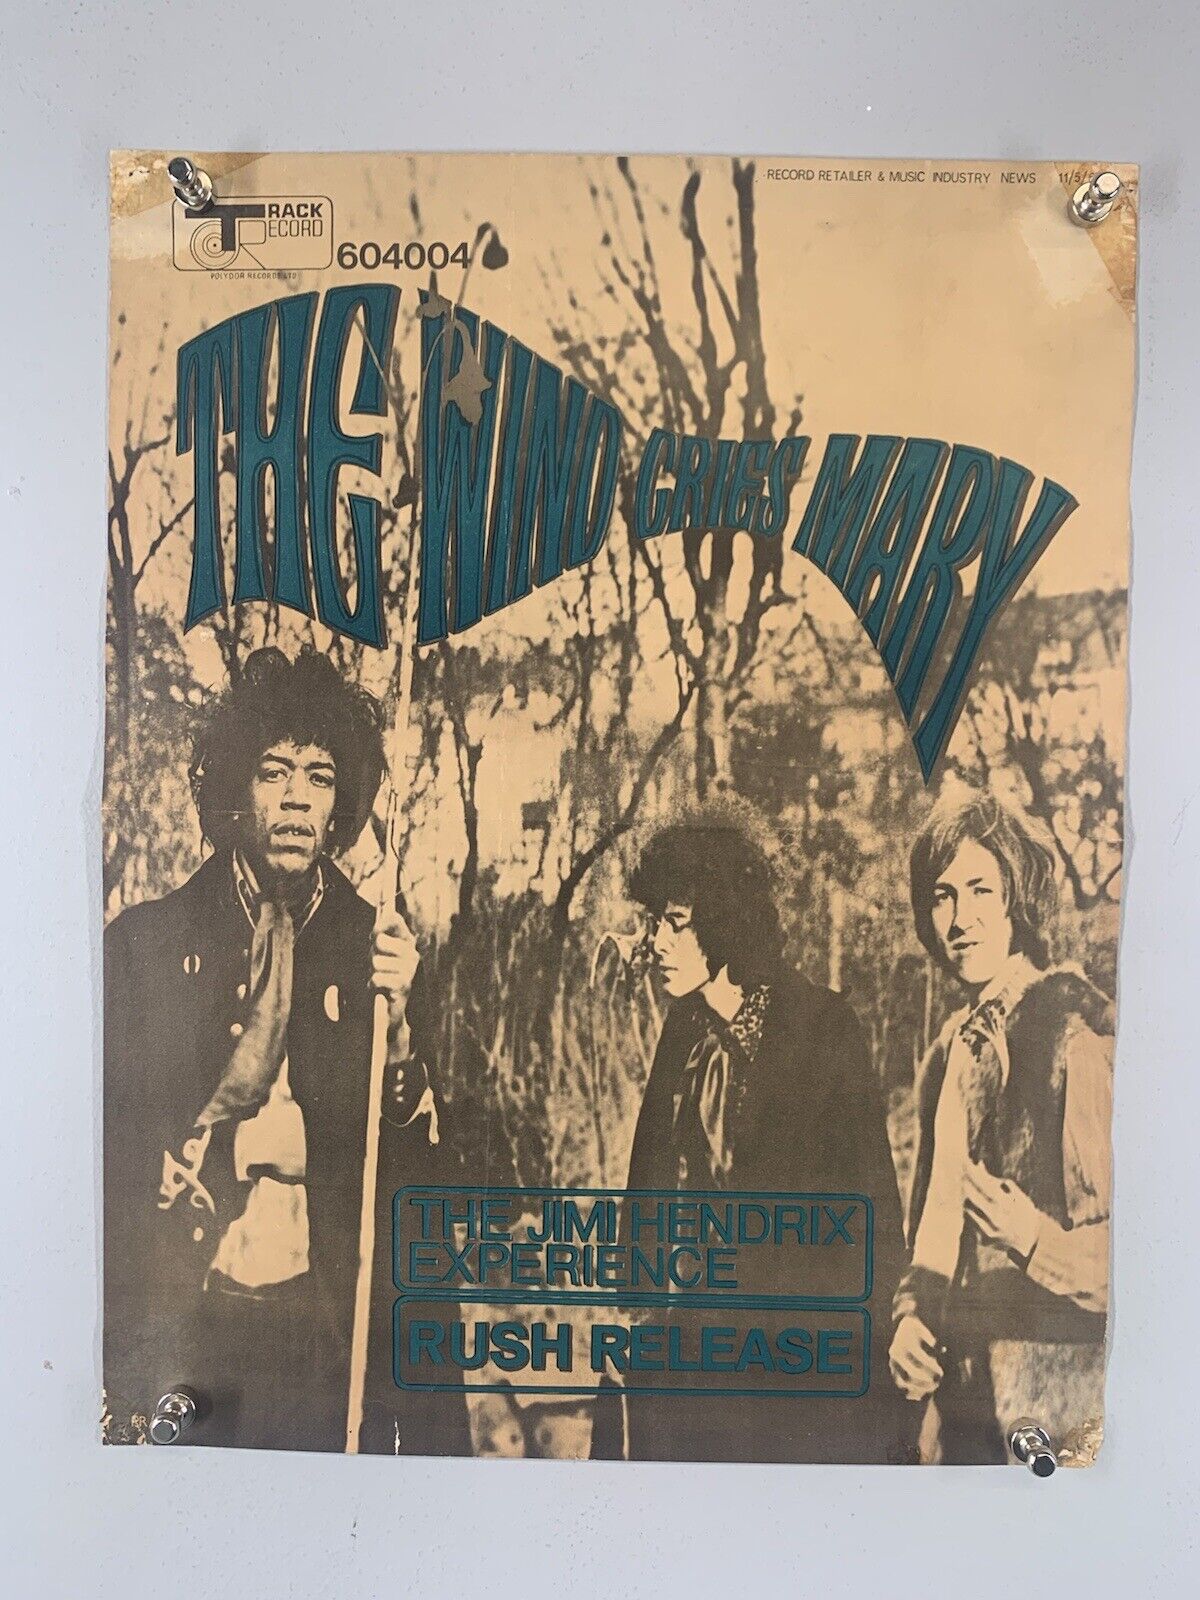 Jimi Hendrix Poster Original Vintage Track Record Promo The Wind Cries Mary 1967